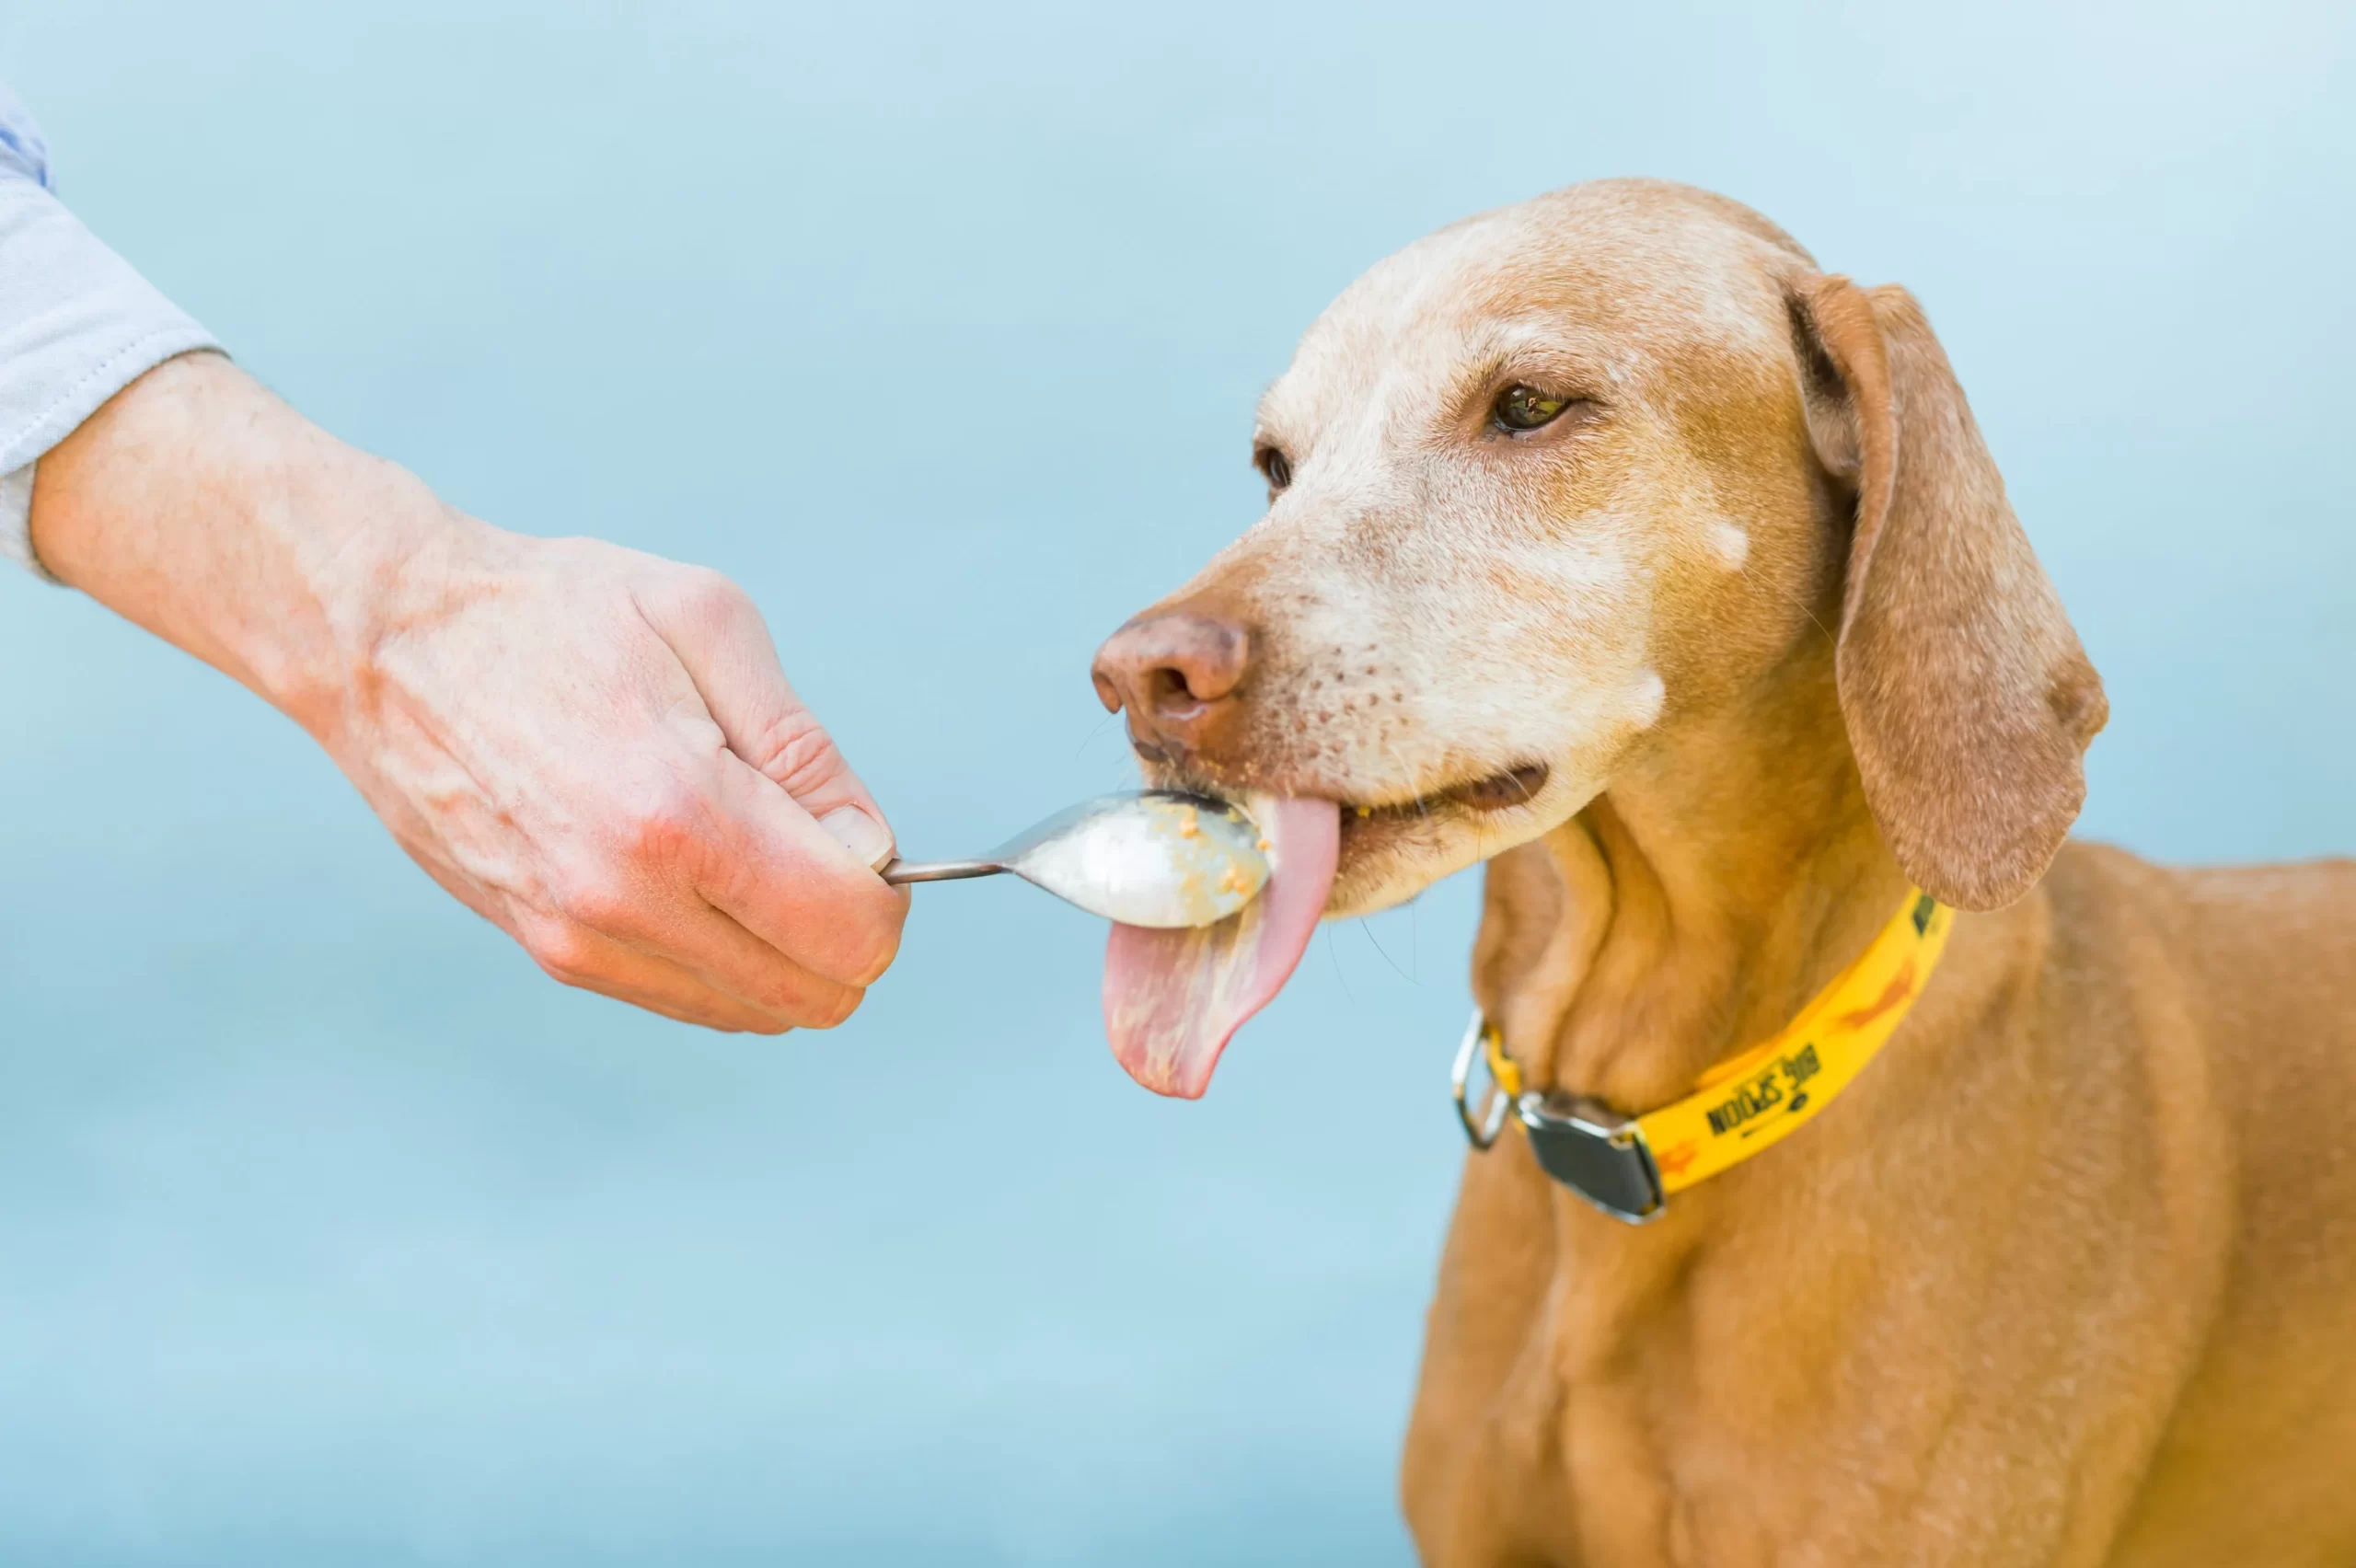 peanut butter is good for dogs